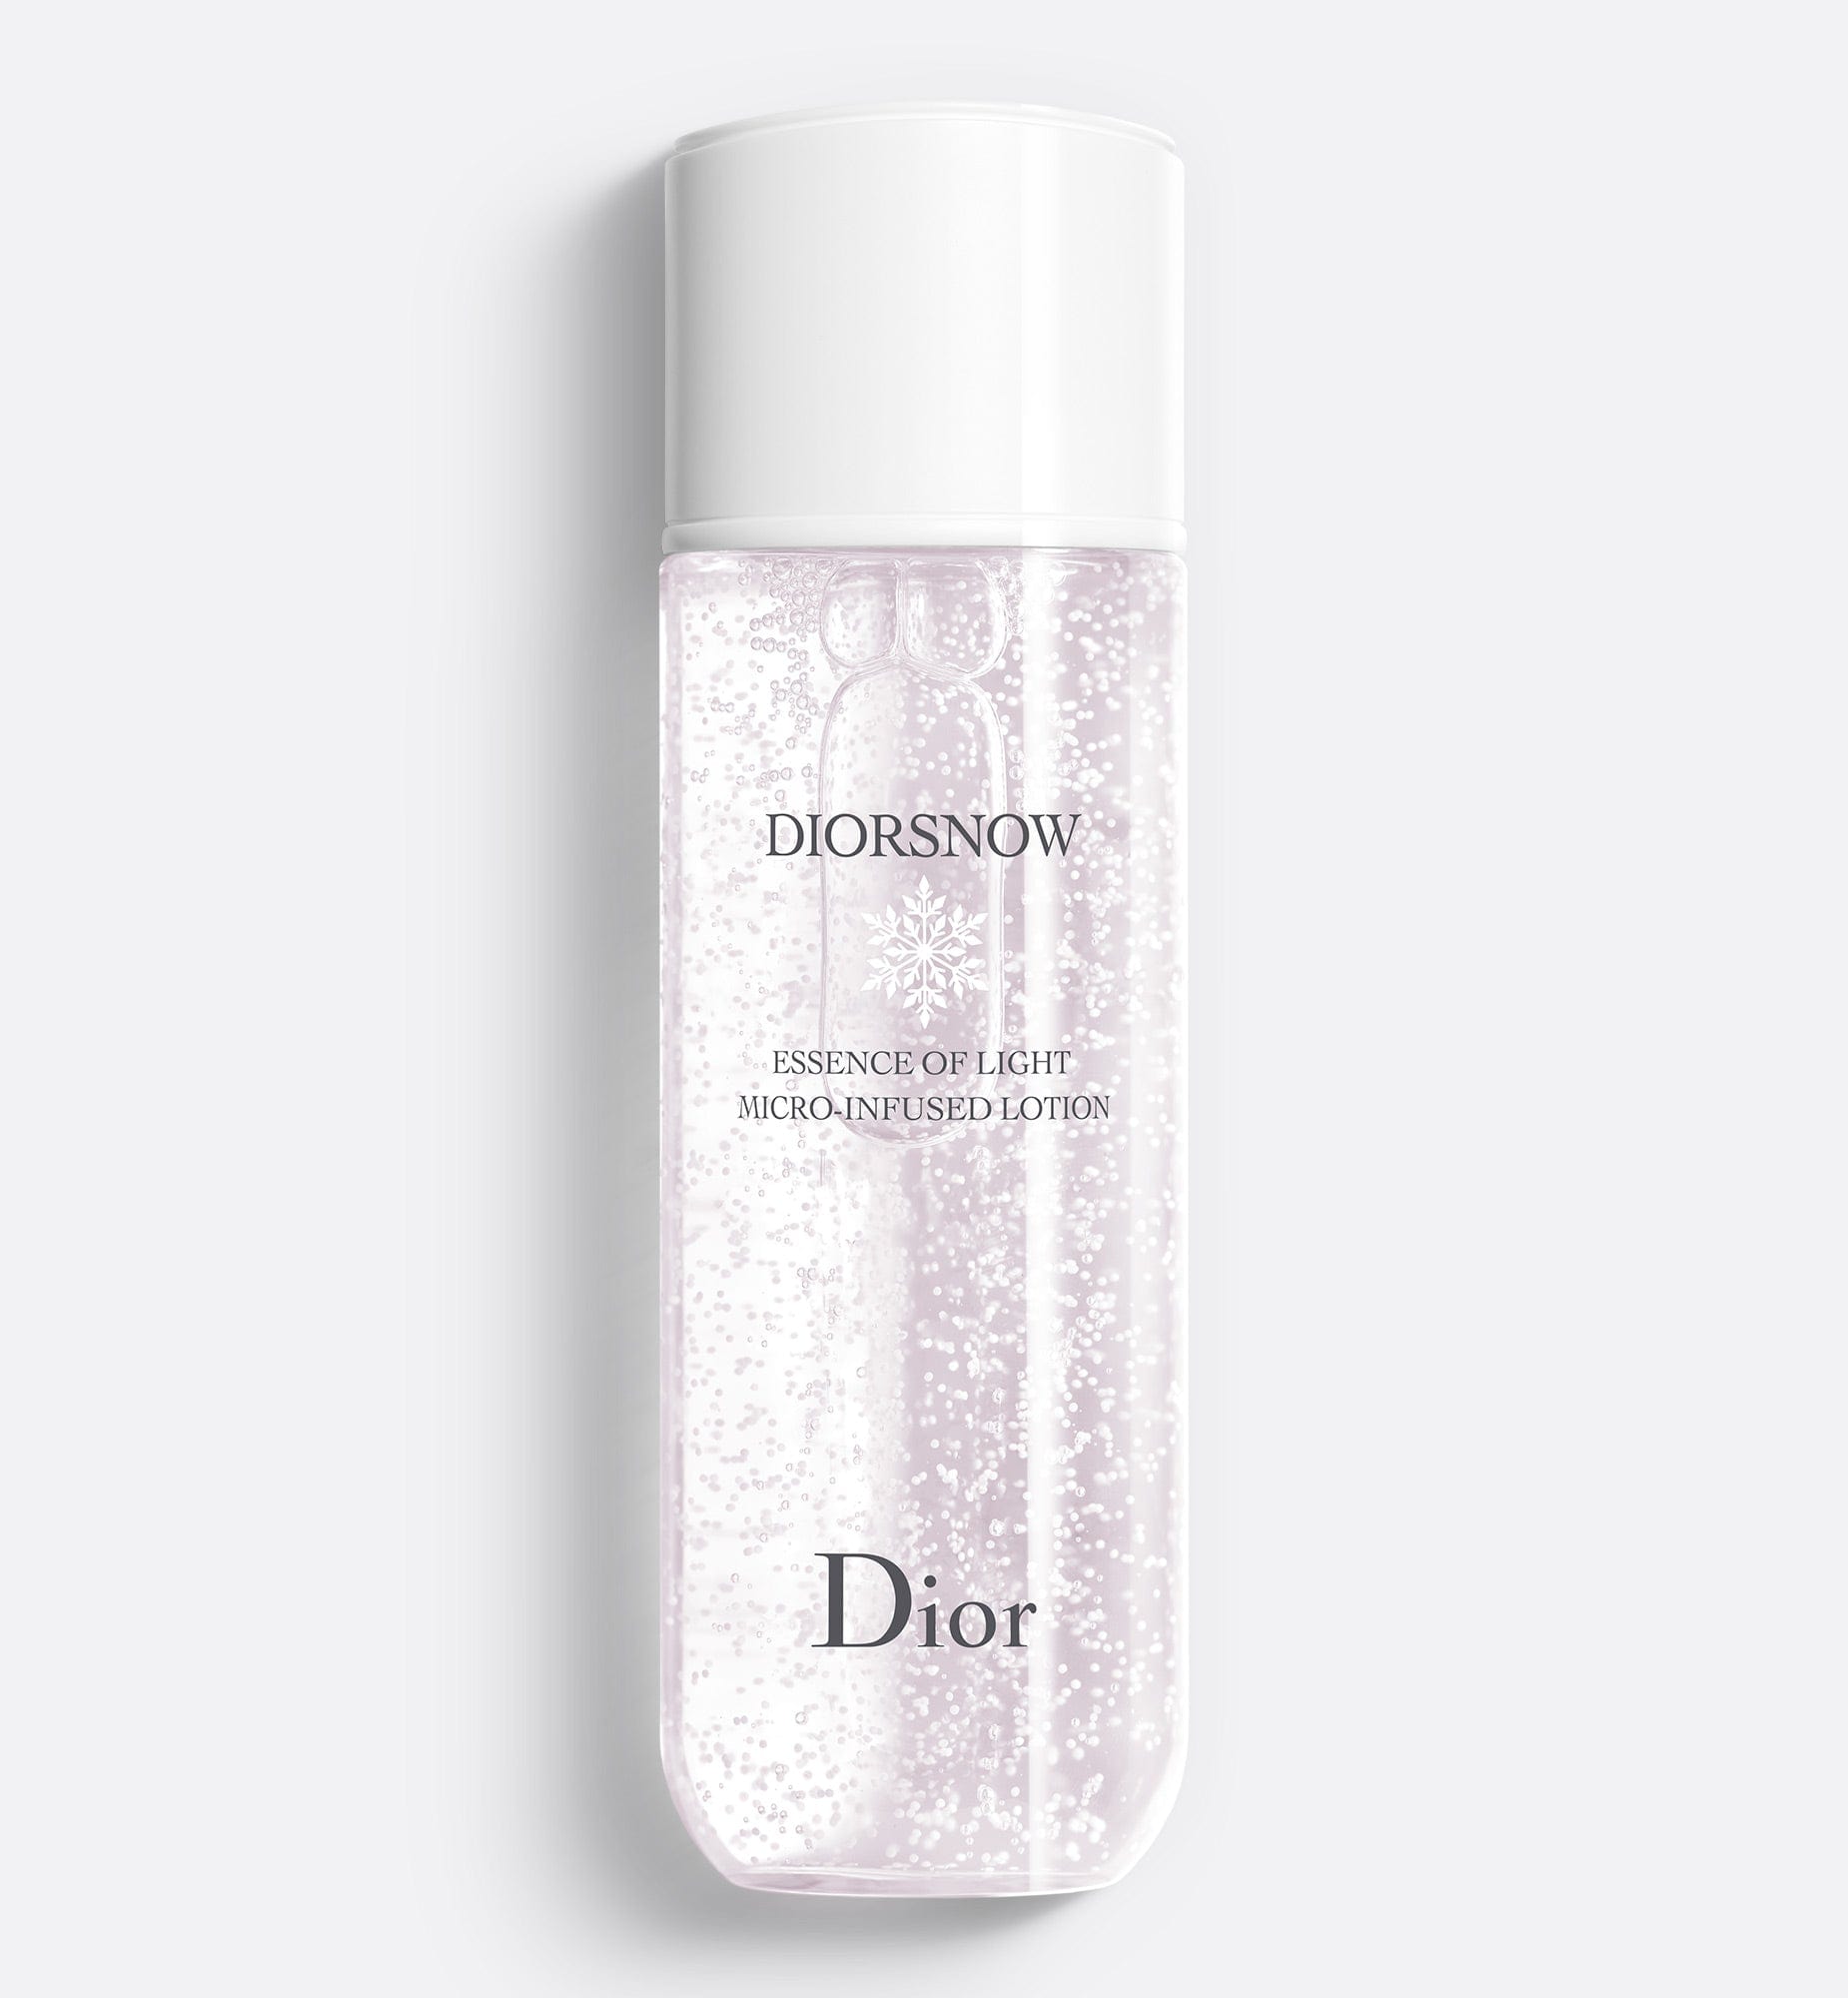 Diorsnow Essence of Light Micro-Infused Lotion | Moisturising and brightening lotion - protects, beautifies and illuminates